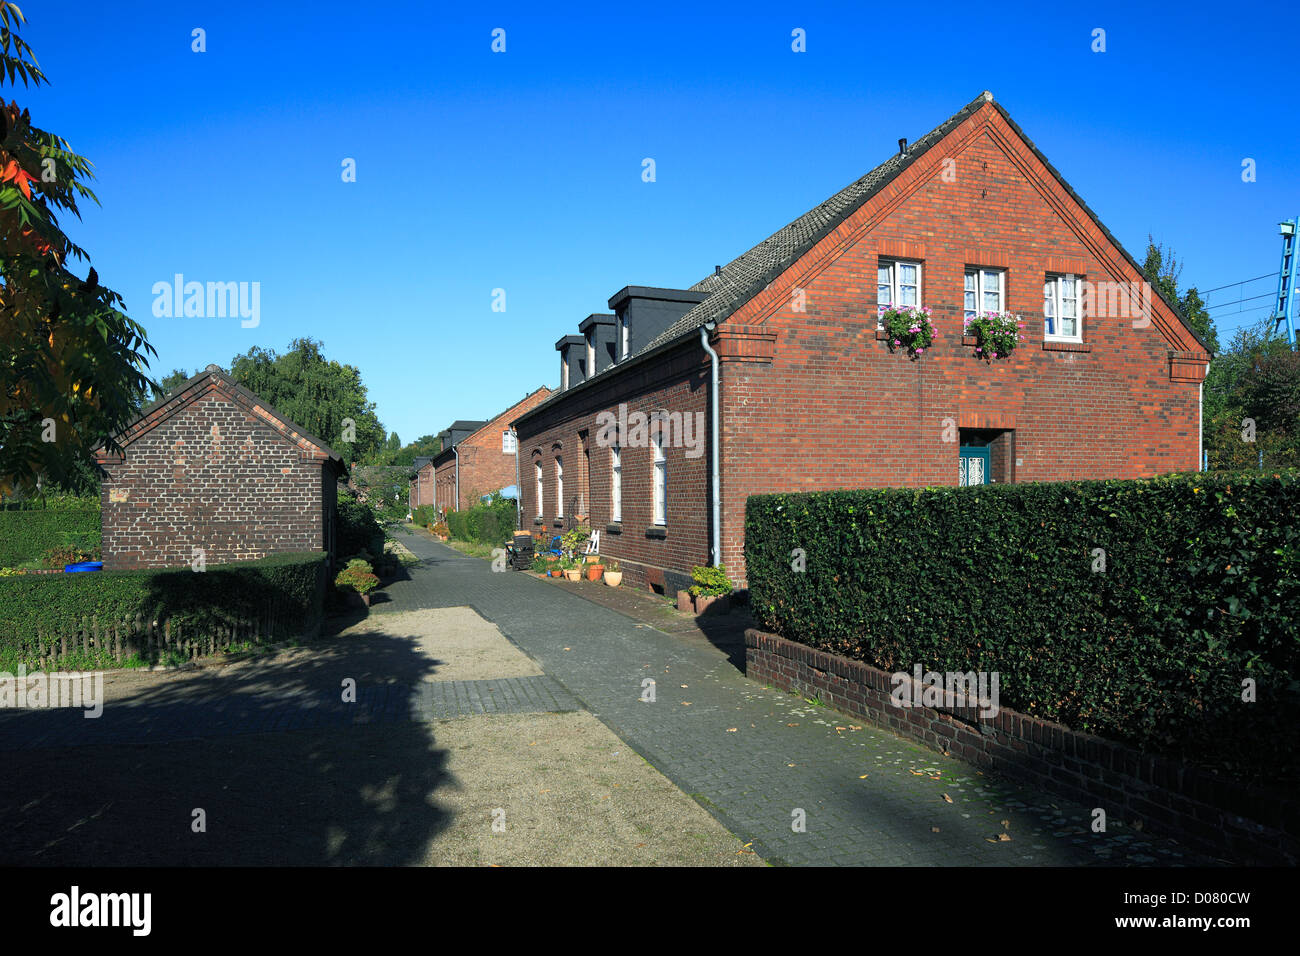 D-Oberhausen, Lower Rhine, Ruhr area, Rhineland, North Rhine-Westphalia, NRW, D-Oberhausen-Osterfeld, Eisenheim settlement, workers settlement, route of industrial heritage, stable and residential building at the Wesselkampstrasse Stock Photo